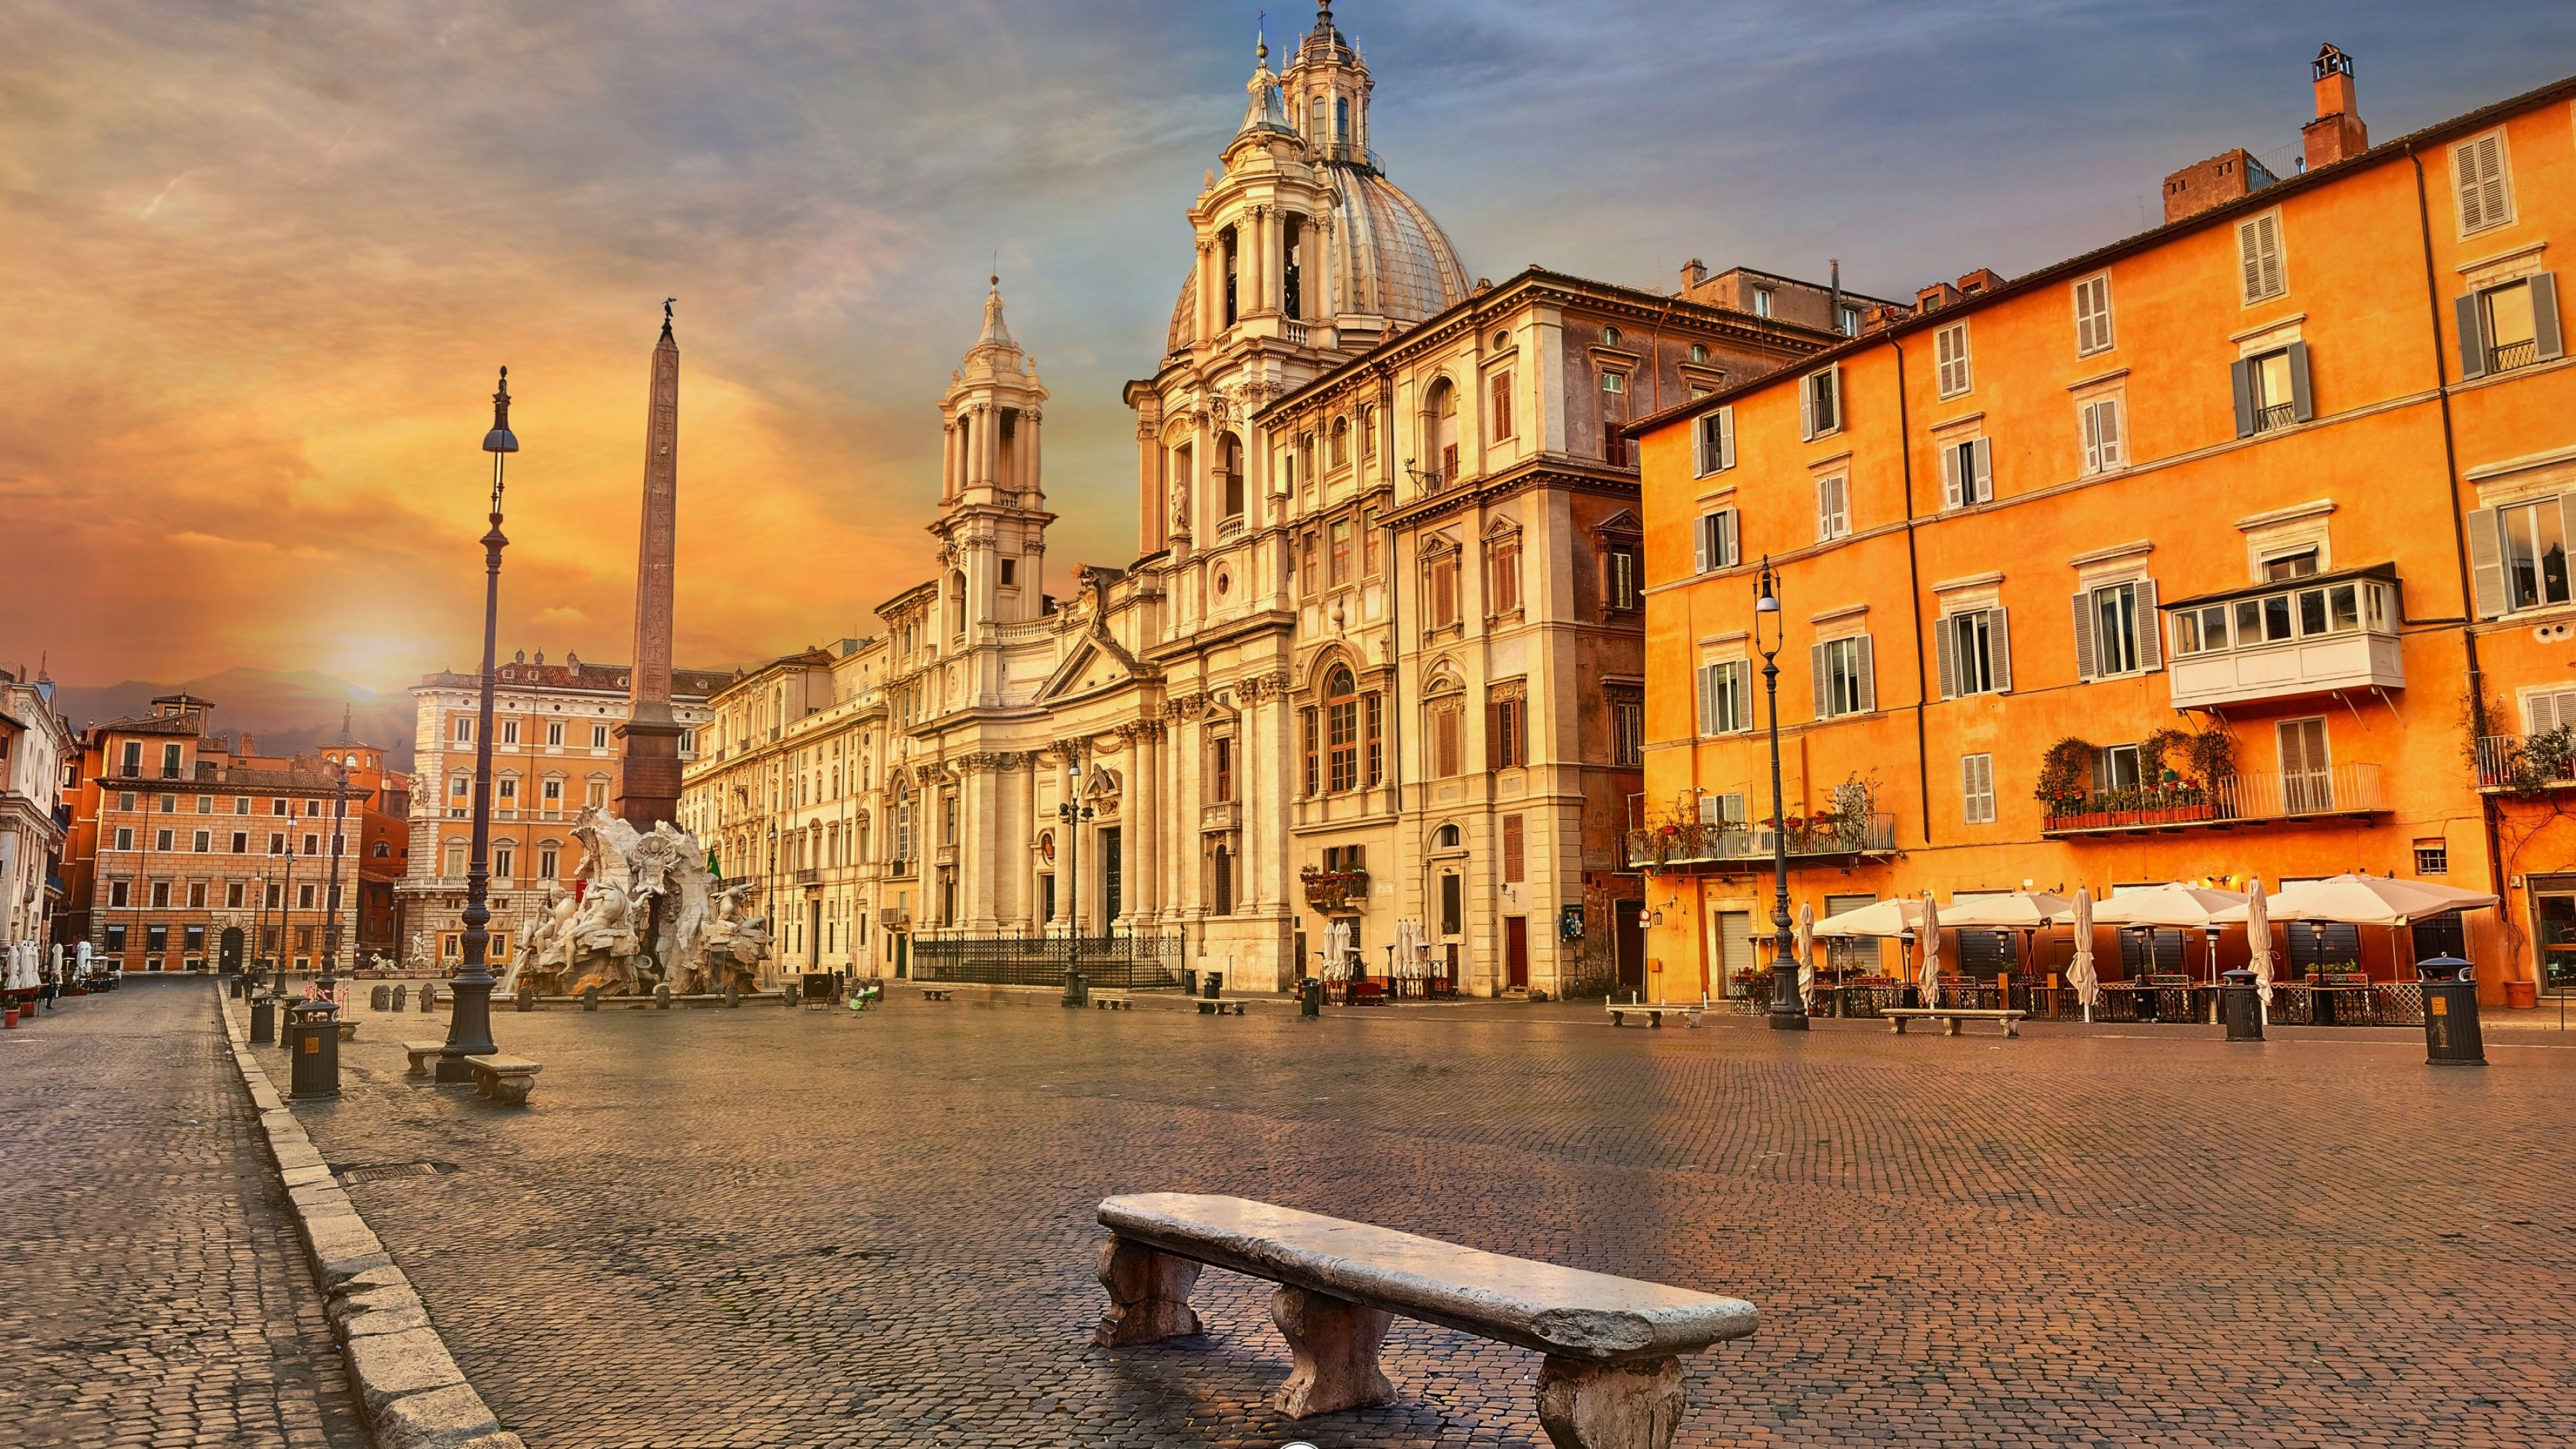 Rome: Piazza Navona, A public open space. 3840x2160 4K Background.